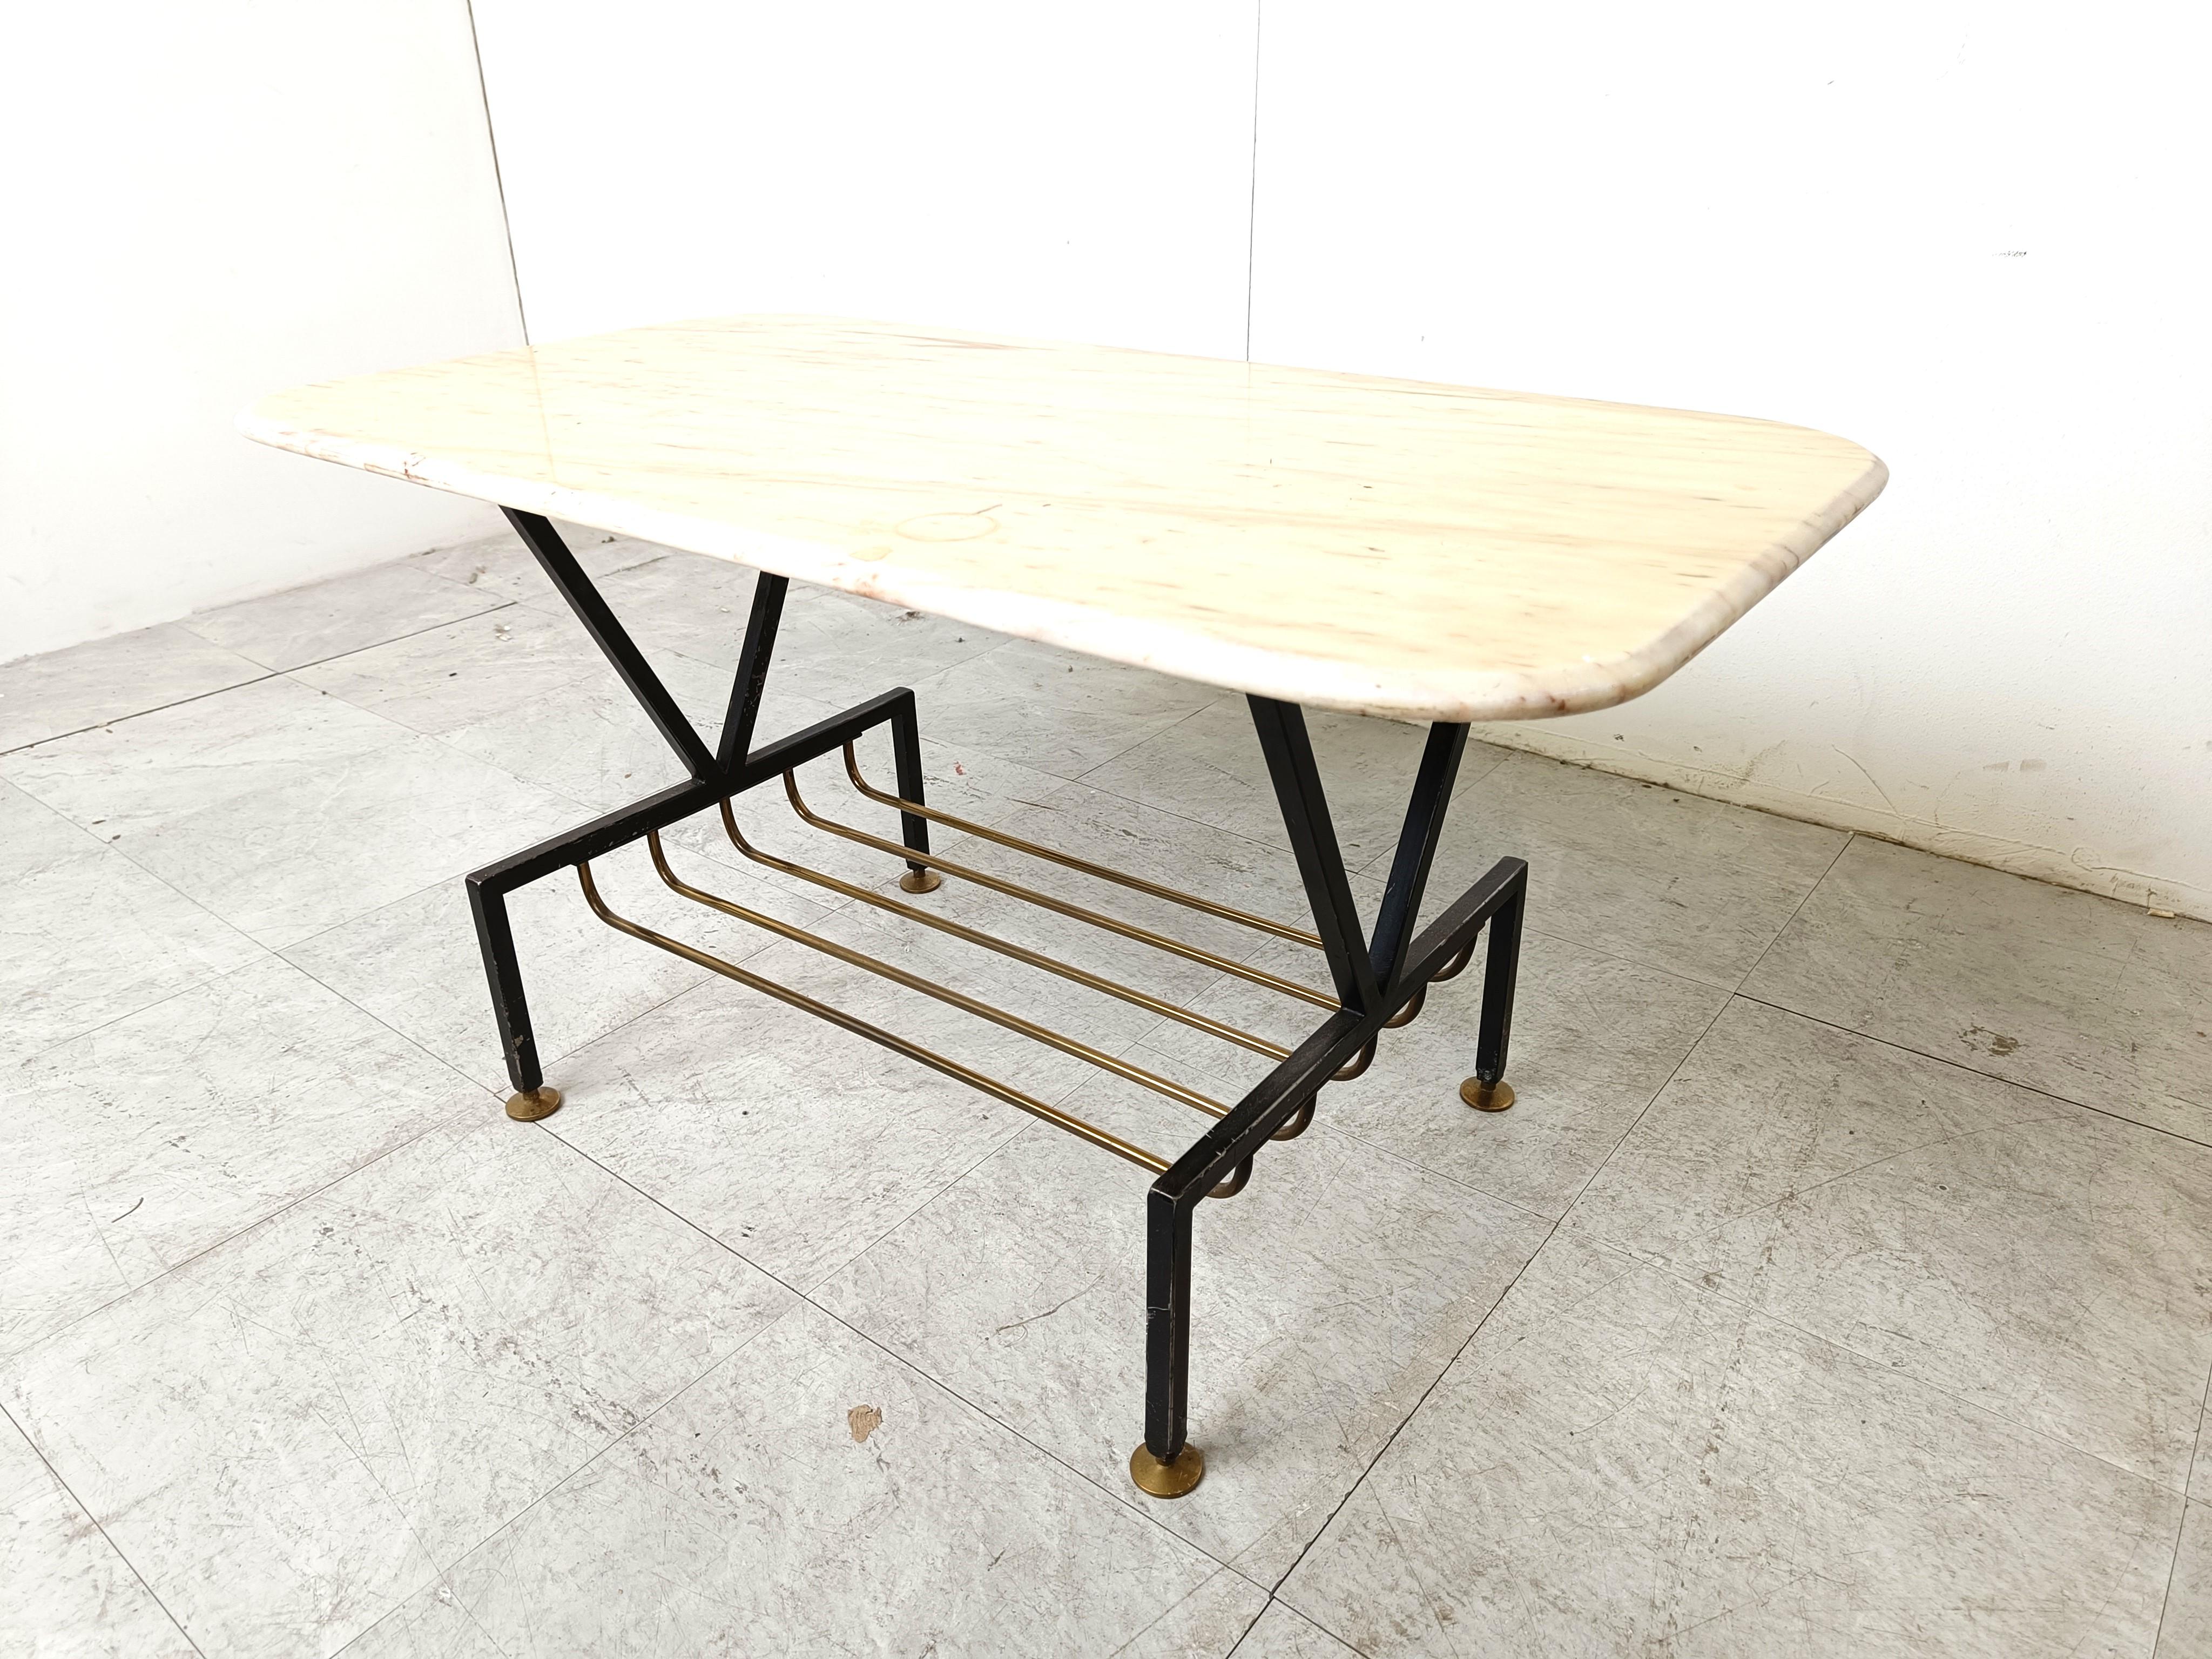 Mid century italian marble coffee table with a white marble top and a brass and black metal base.

Made in italy in the 1950s.

Very elegant coffee table

1950s - Italy 

Very good condition

Height: 42cm/16.53